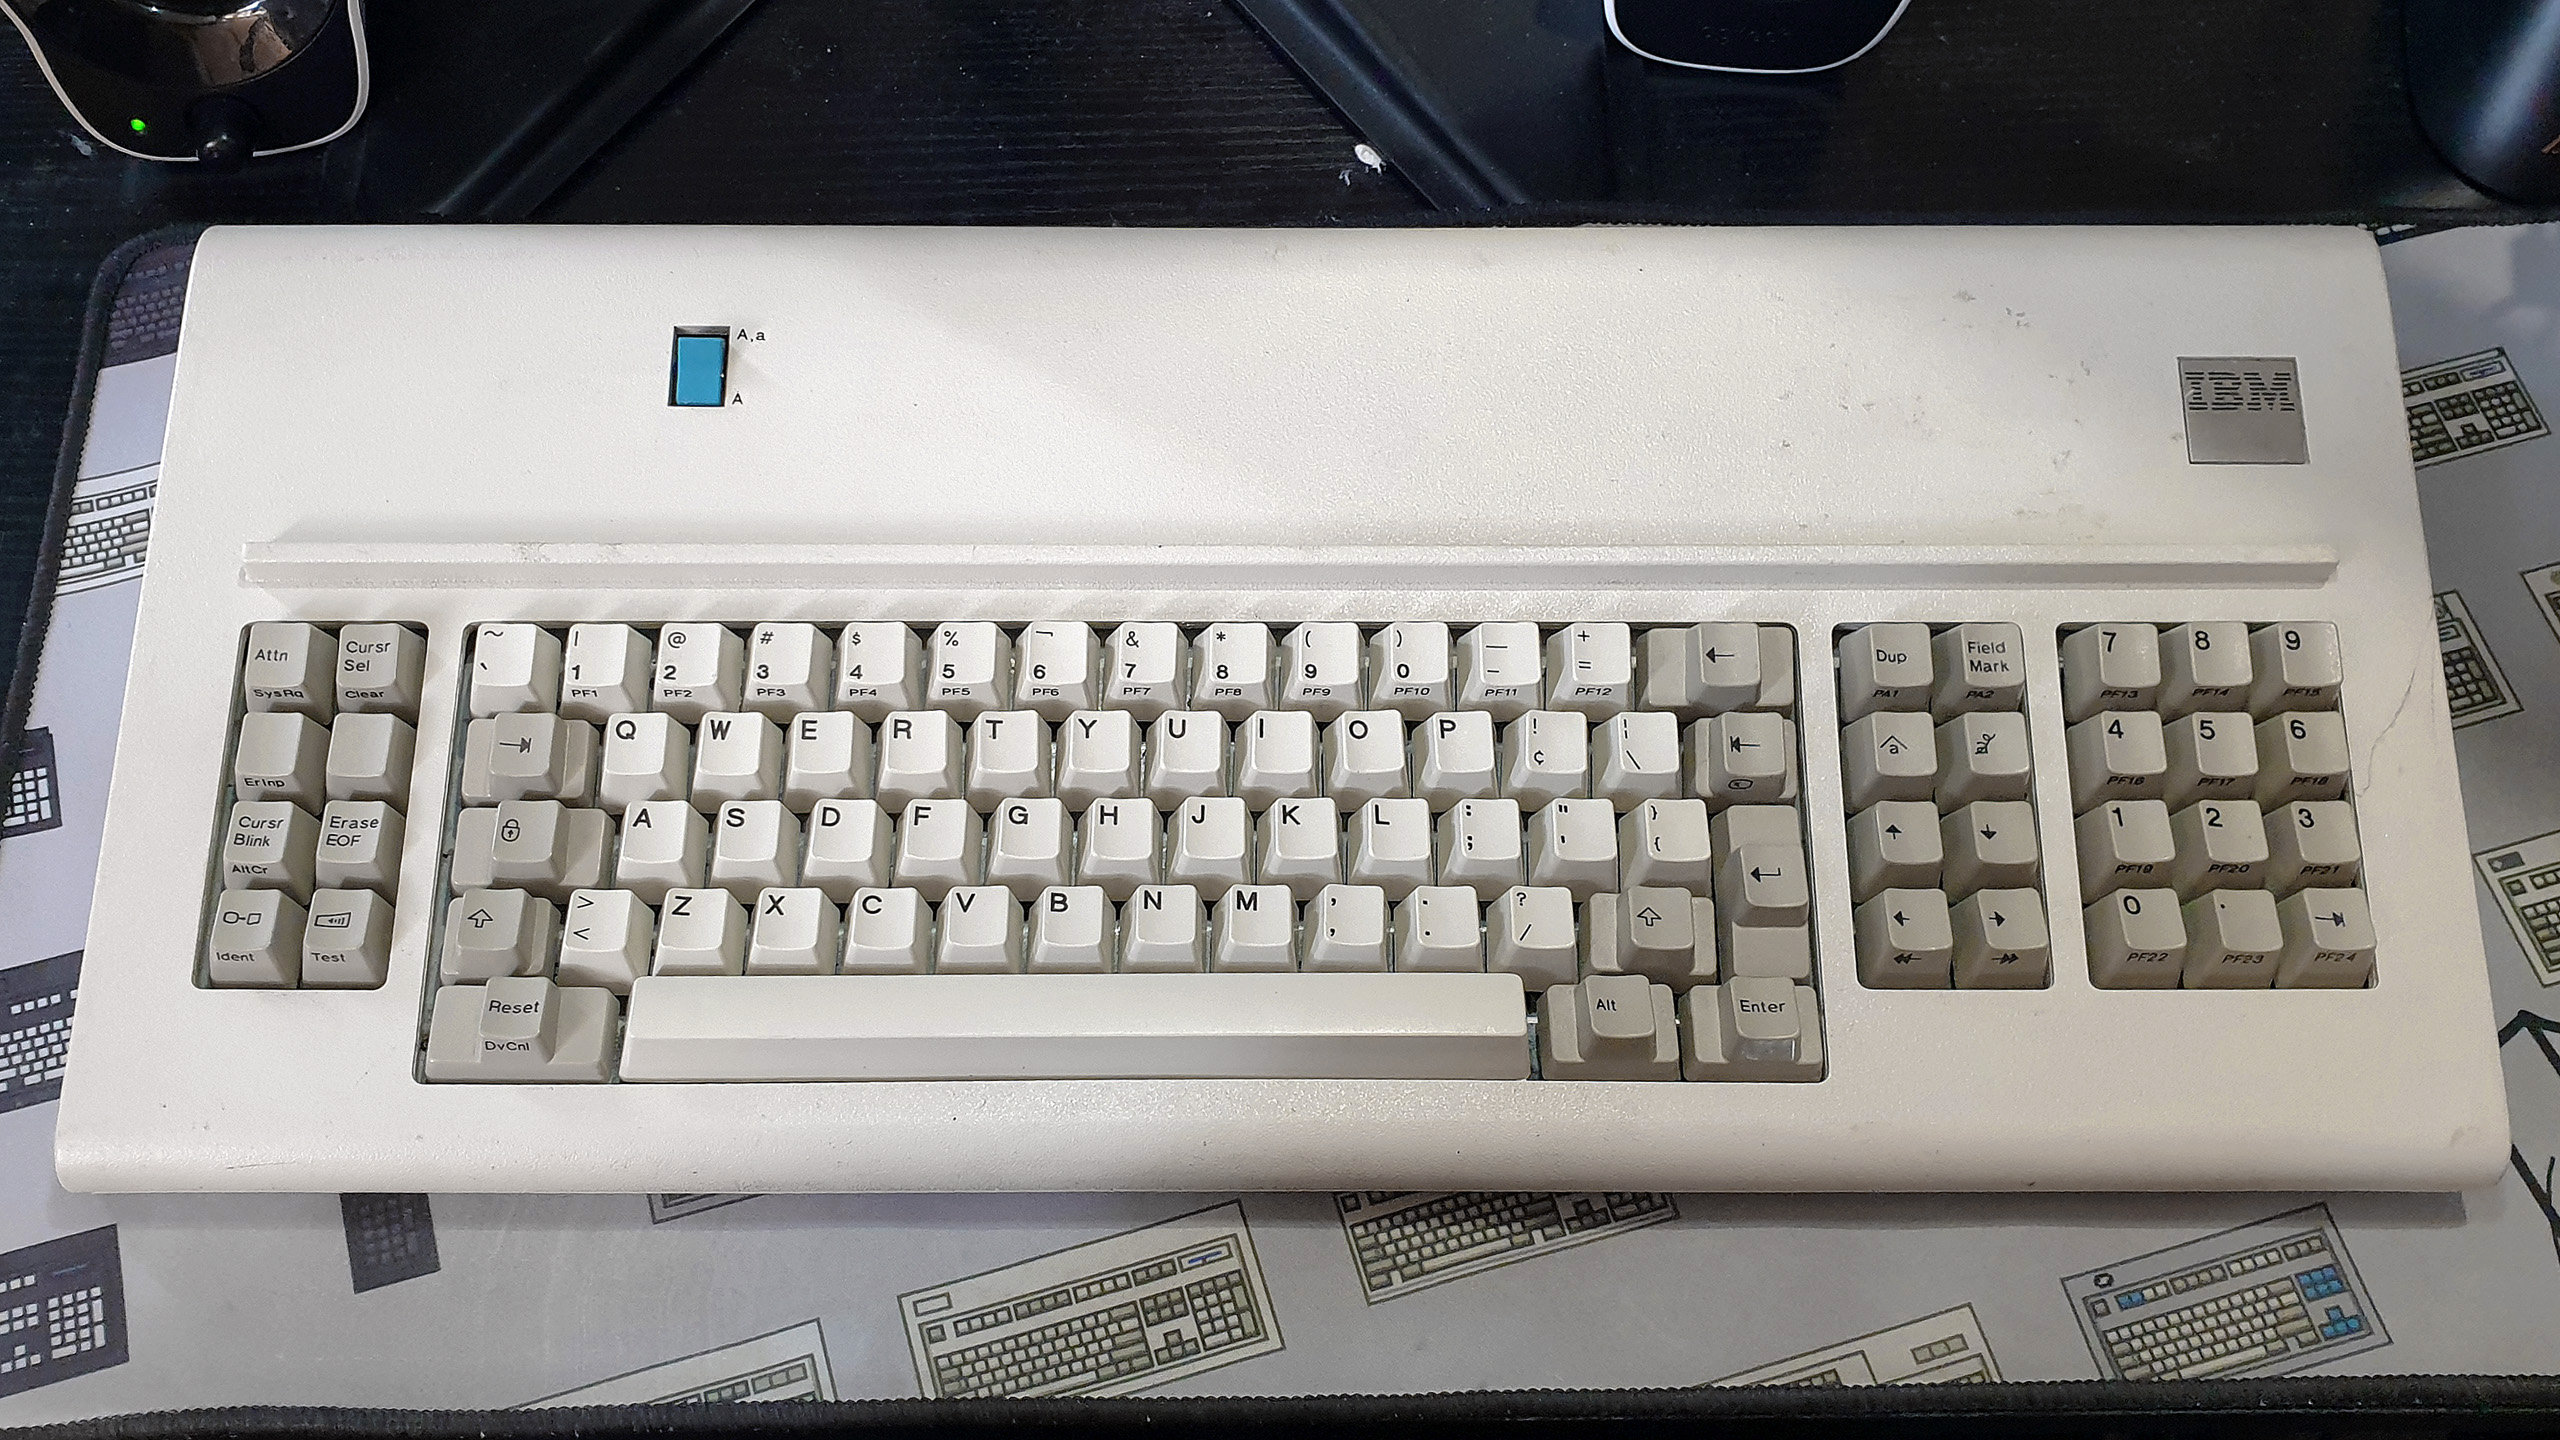 IBM 3178-C4 EBCDIC Typewriter Keyboard<a class='source-link' href='/wiki?id=modelf#Sources'><sup>[ASK]</sup></a>